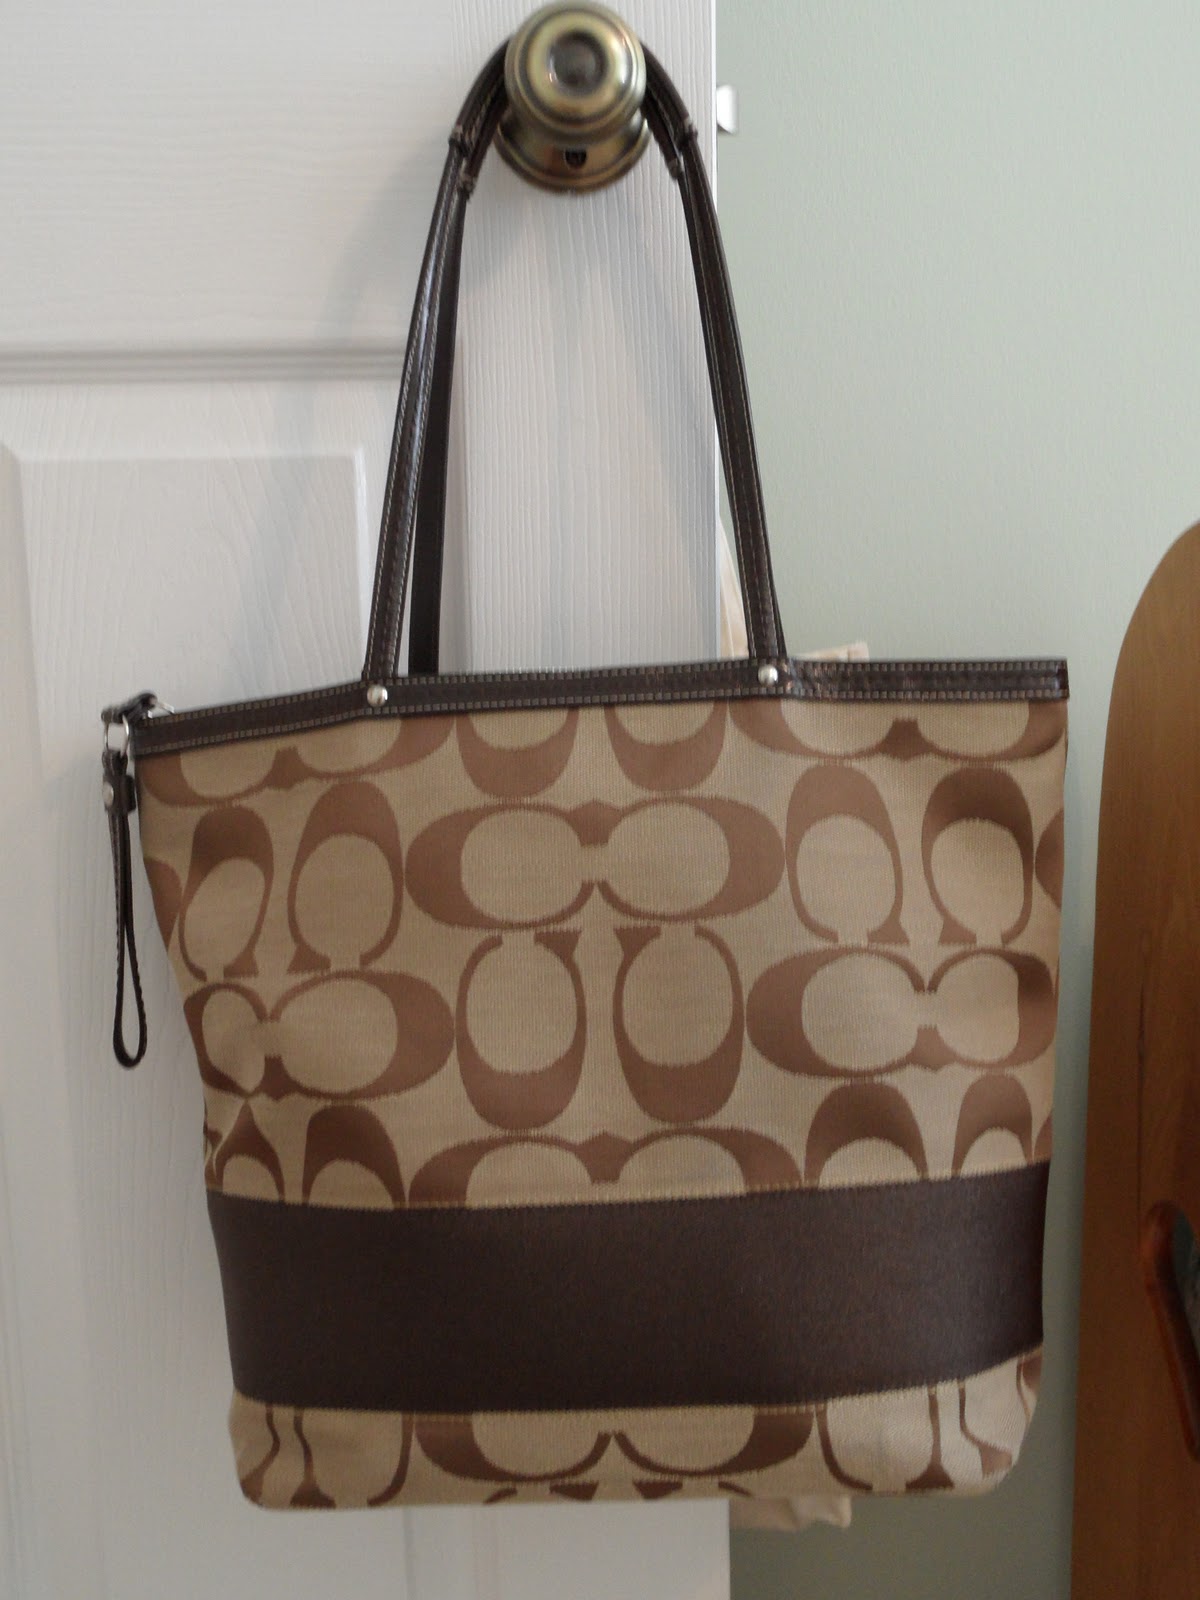 The inside is much the same as the Vera Bradley bag aboveâonelong ...